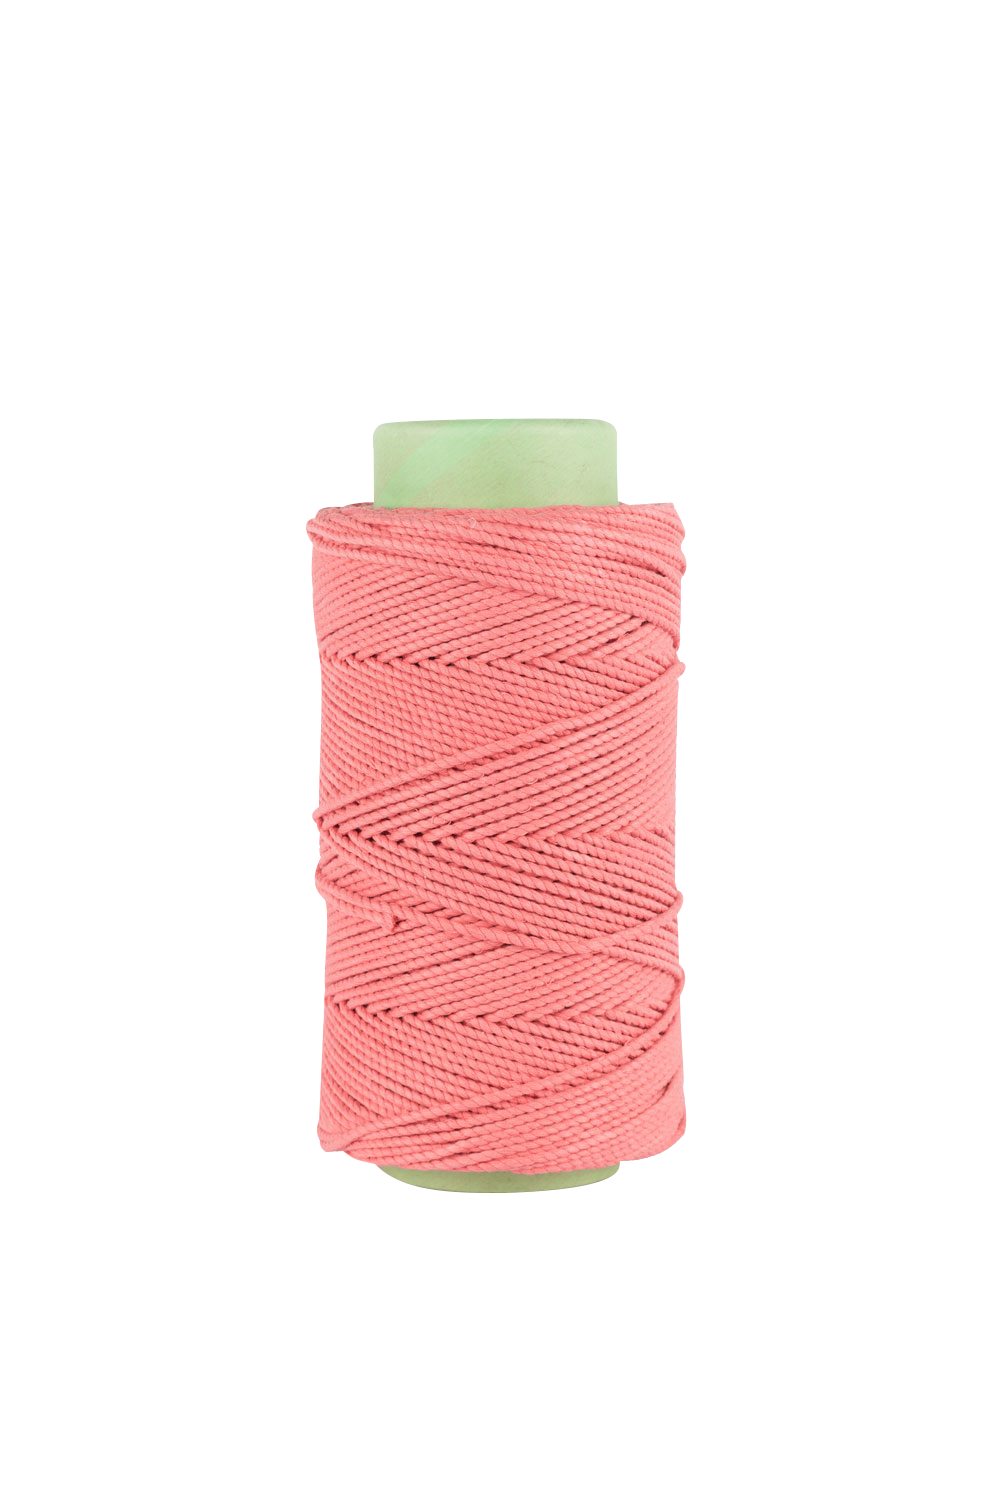 Pink 3mm Cotton Macrame Cord - 325ft Thin Rope for Crafts